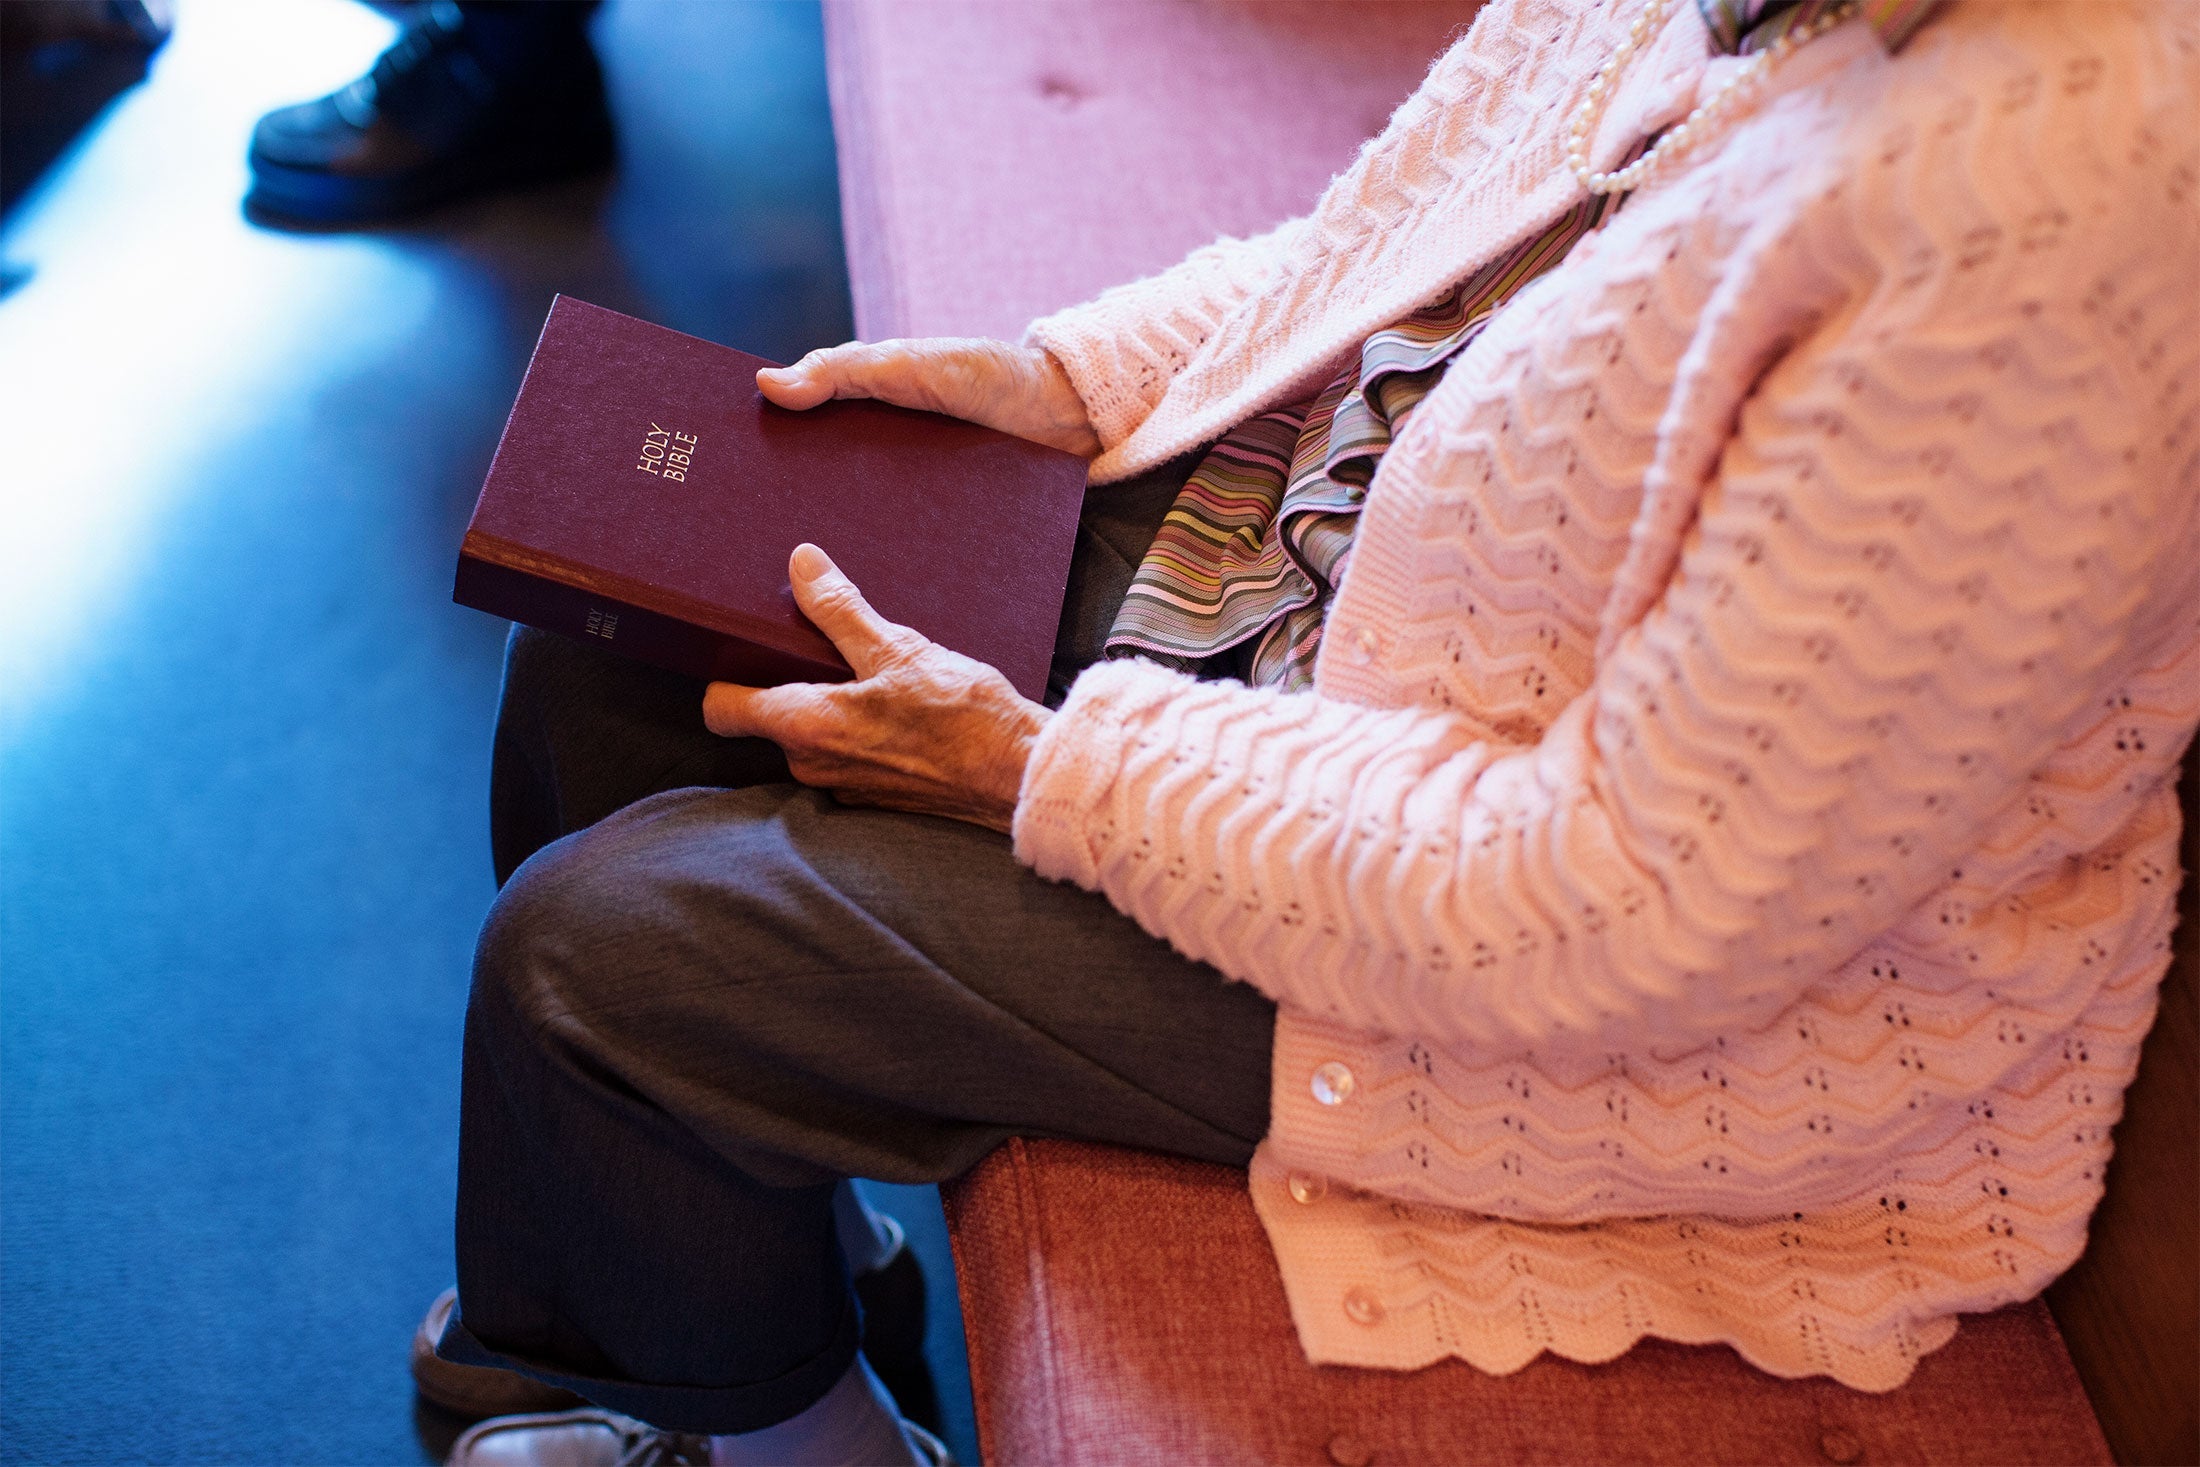 An elderly woman sits in a pew, holding a Bible.